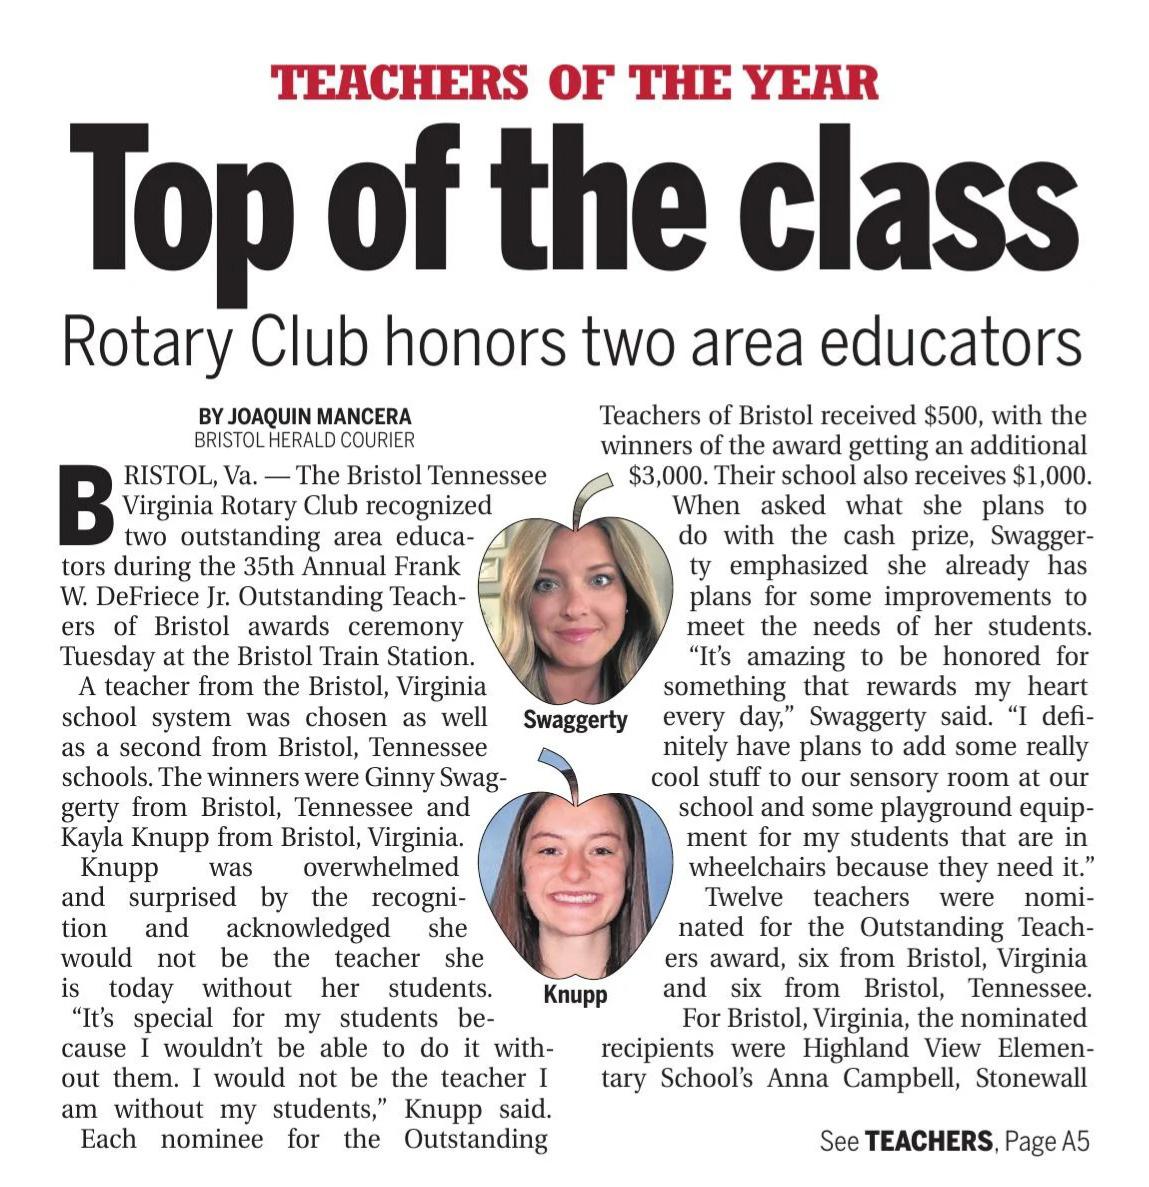 BHC News Story for Teacher of the Year